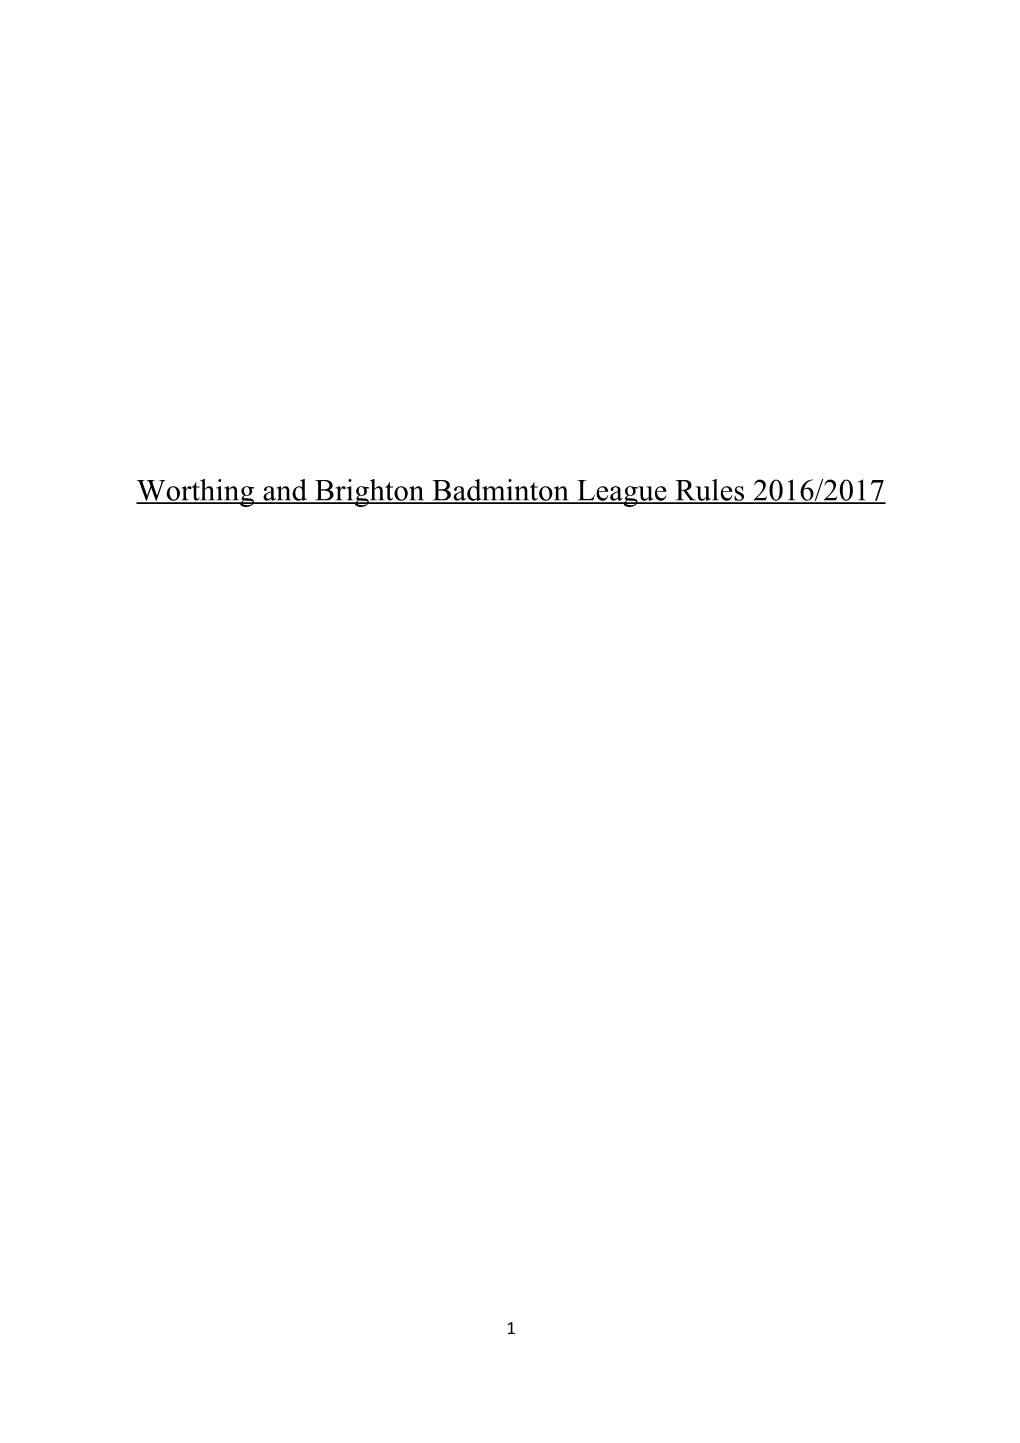 Worthing and Brighton Badminton League Rules 2016/2017